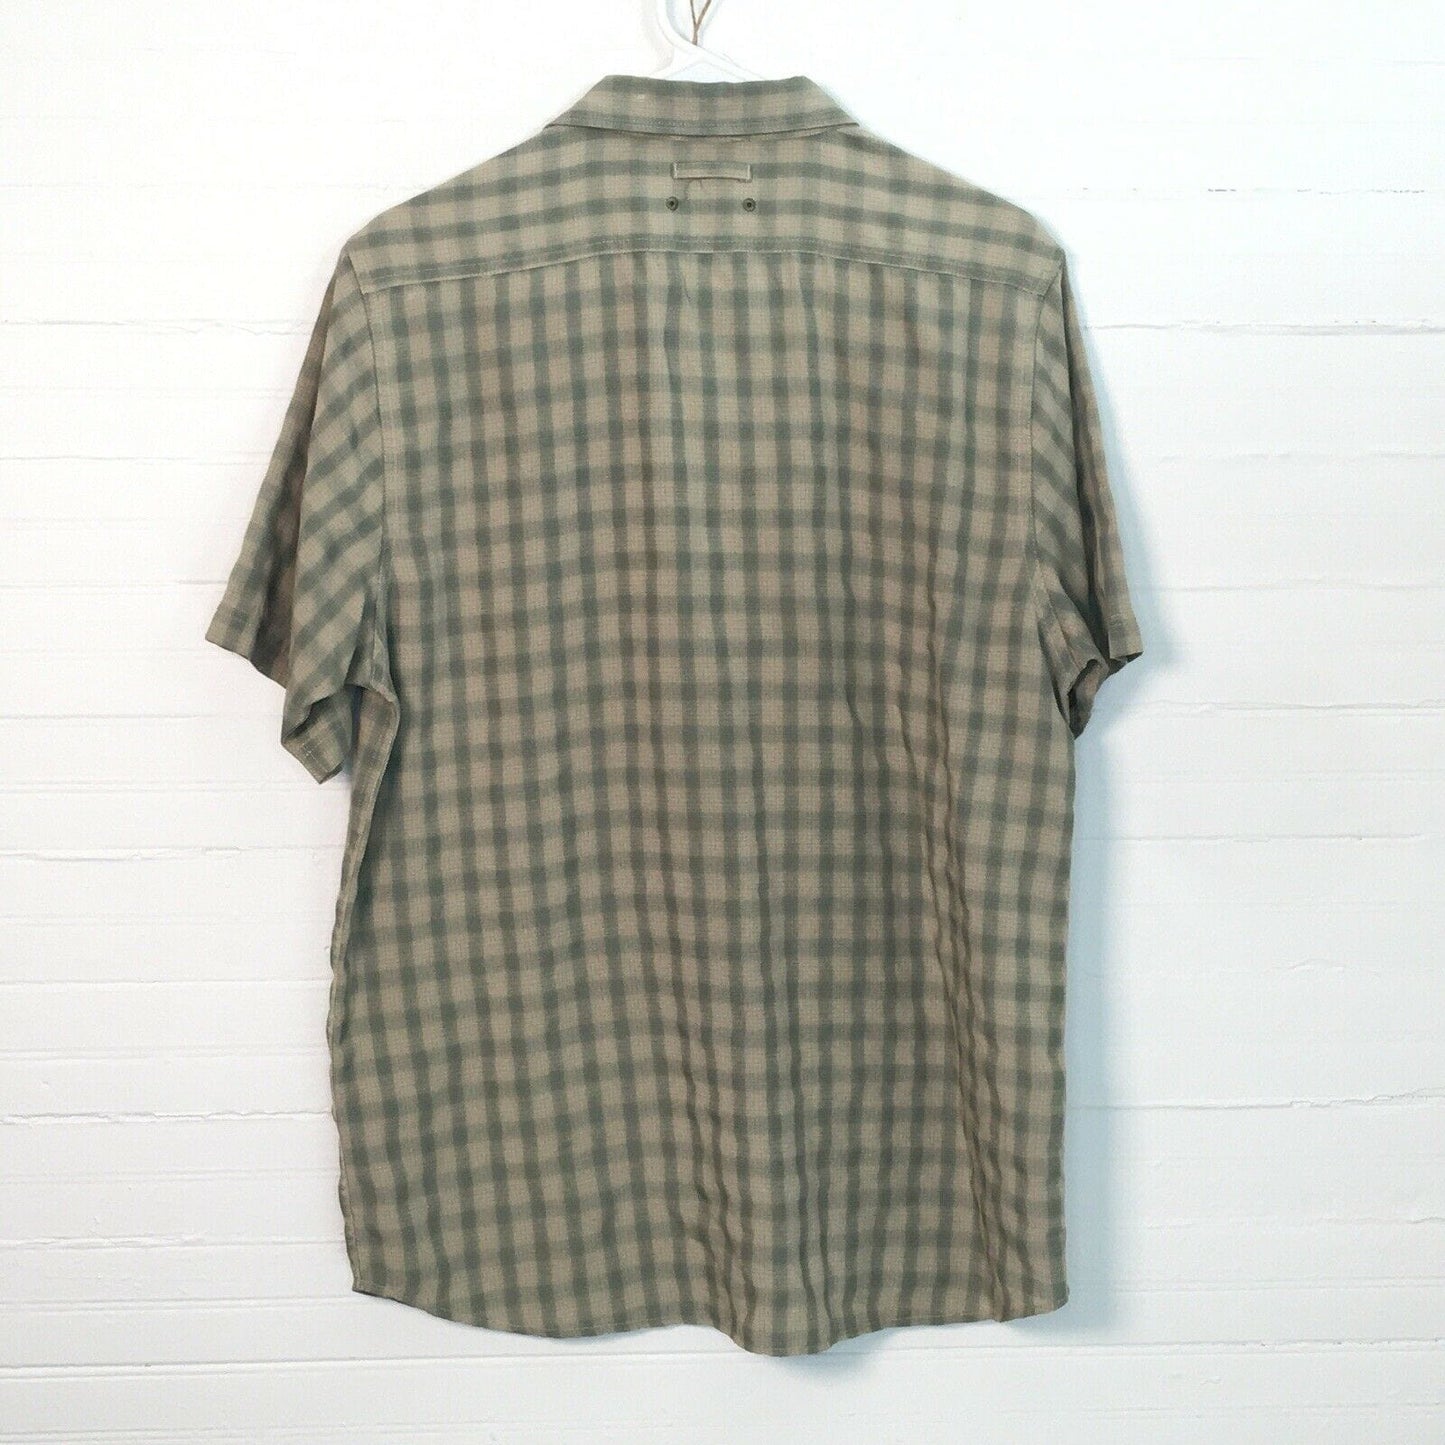 Adventure The North Face Men's Short Sleeve Button Up Shirt - M - Brown Green Plaid - Vented - Very Good